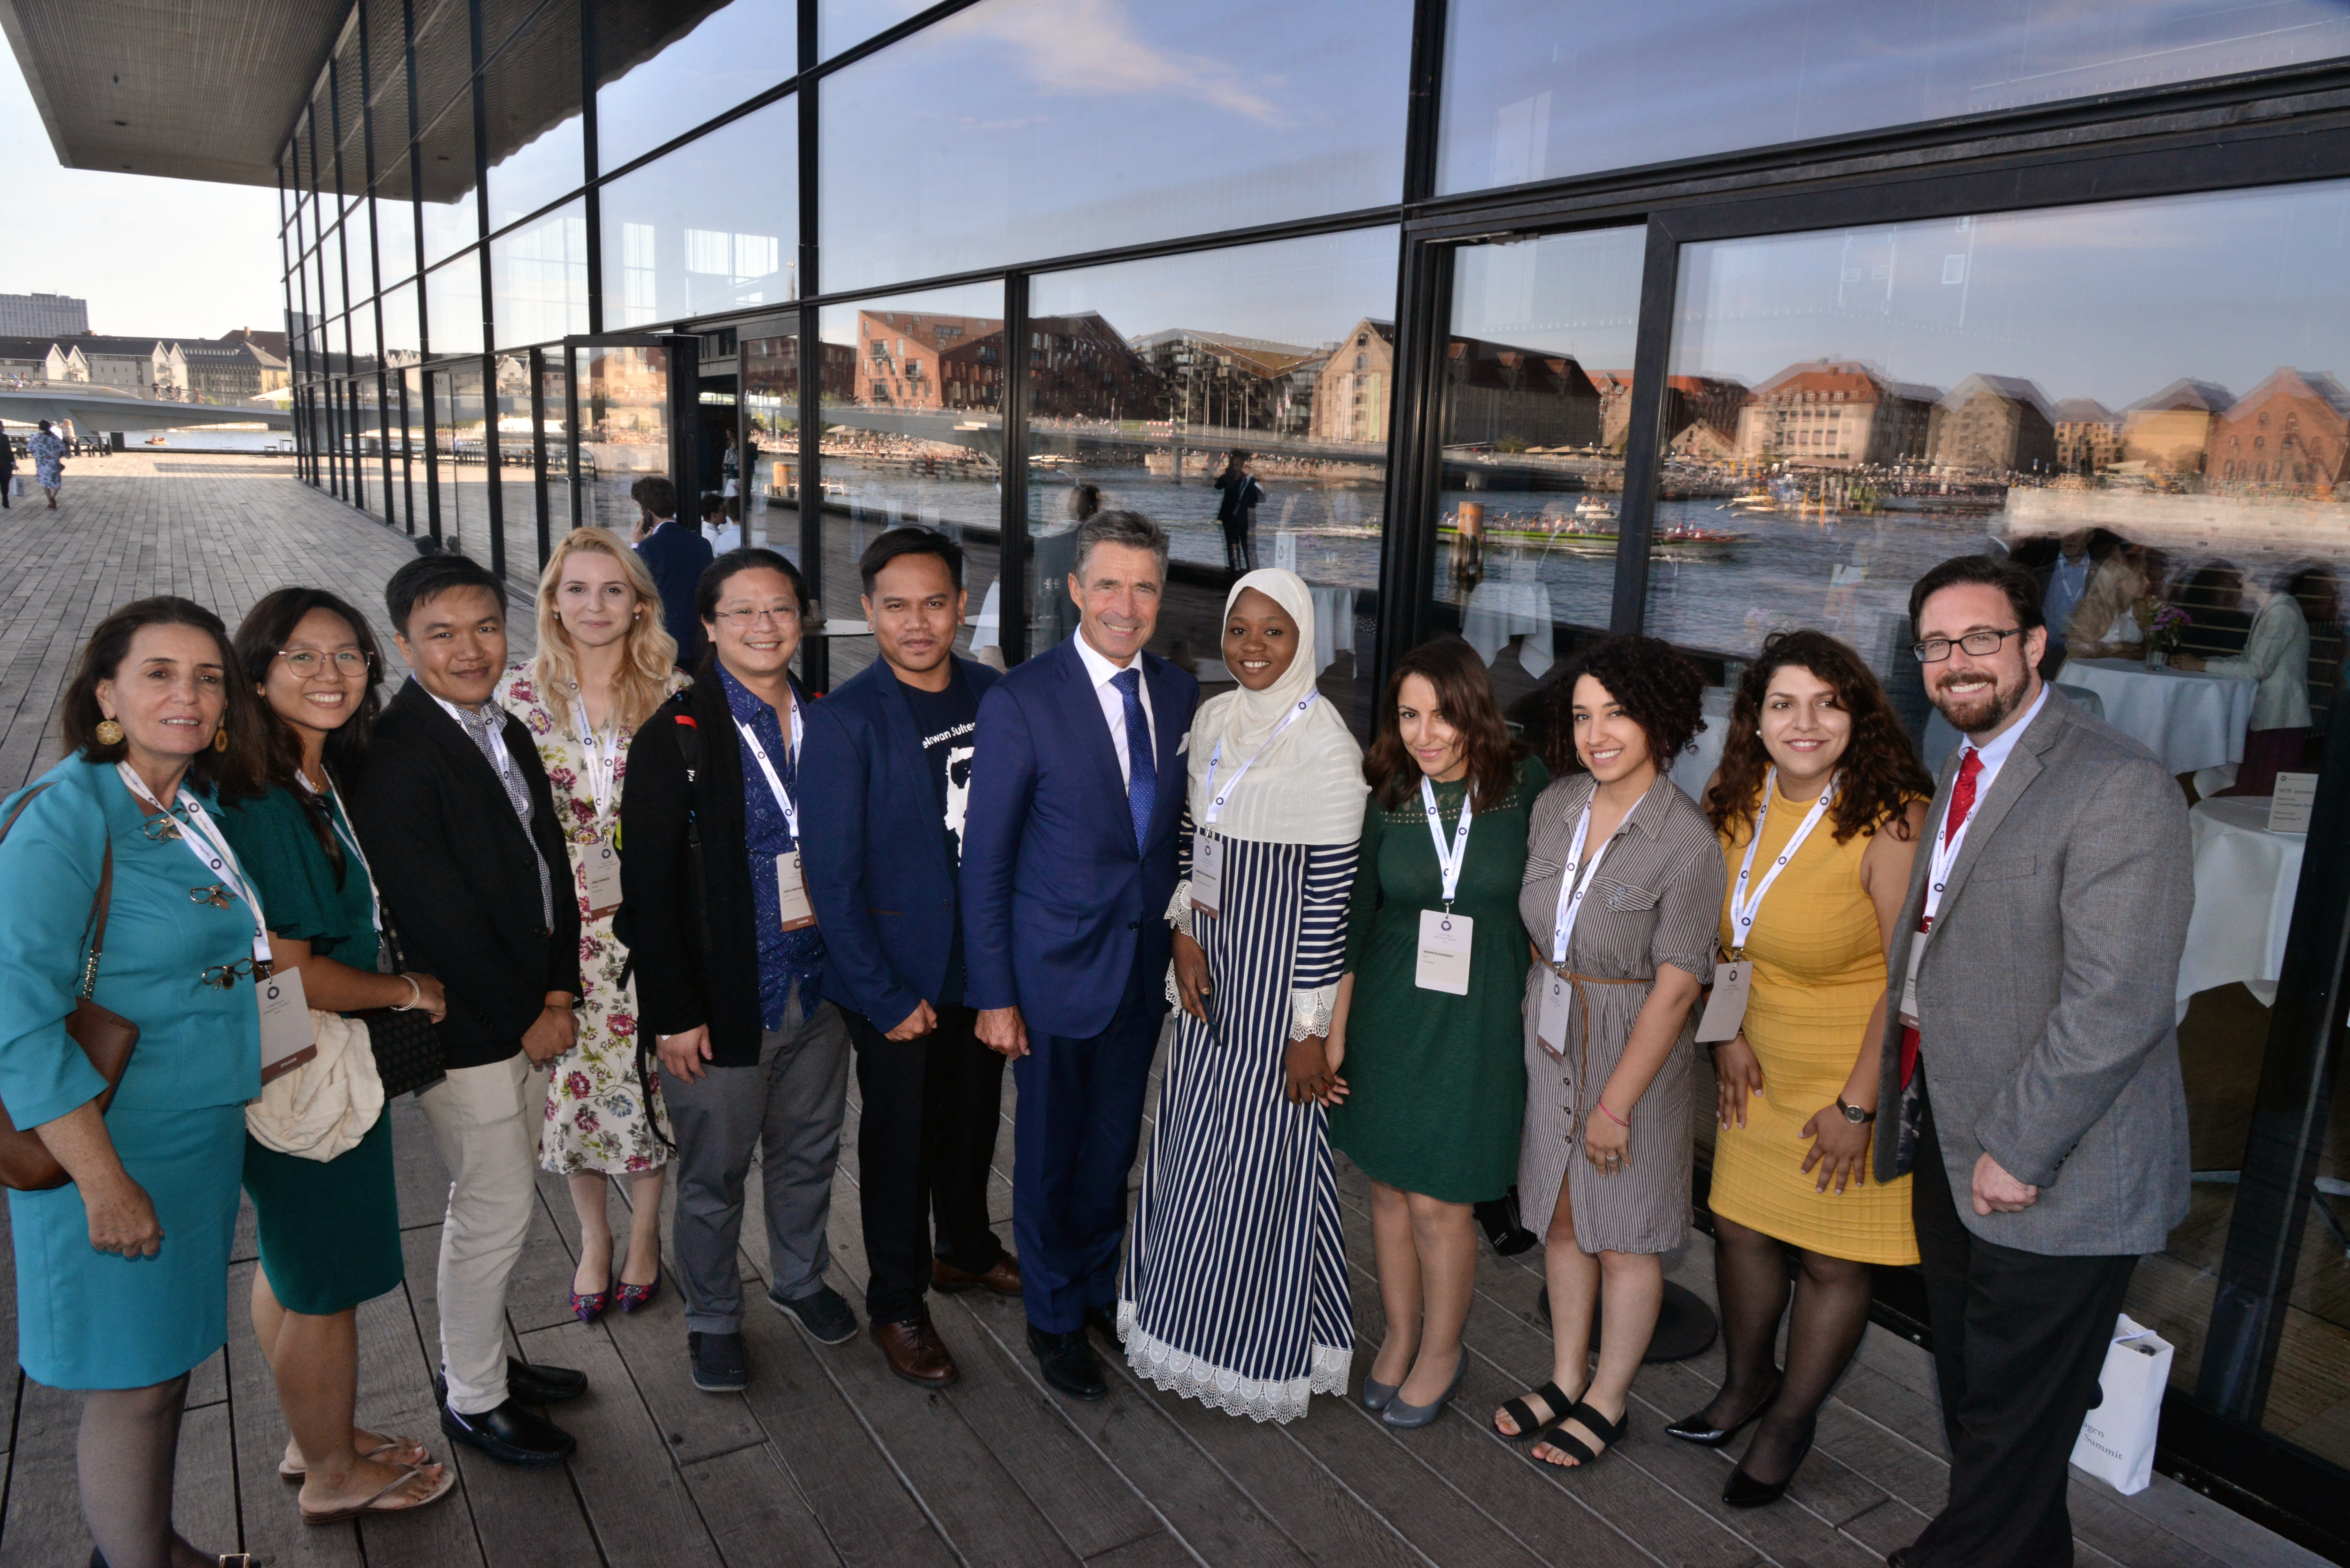 Gunawan (6th from the left), the founder of the Sikola Mombine, a political training school in Indonesia’s Central Sulawesi Province, poses with former NATO Secretary General Anders Fogh Rasmussen (center) and other participants at the 2019 Copenhagen Democracy Summit. 